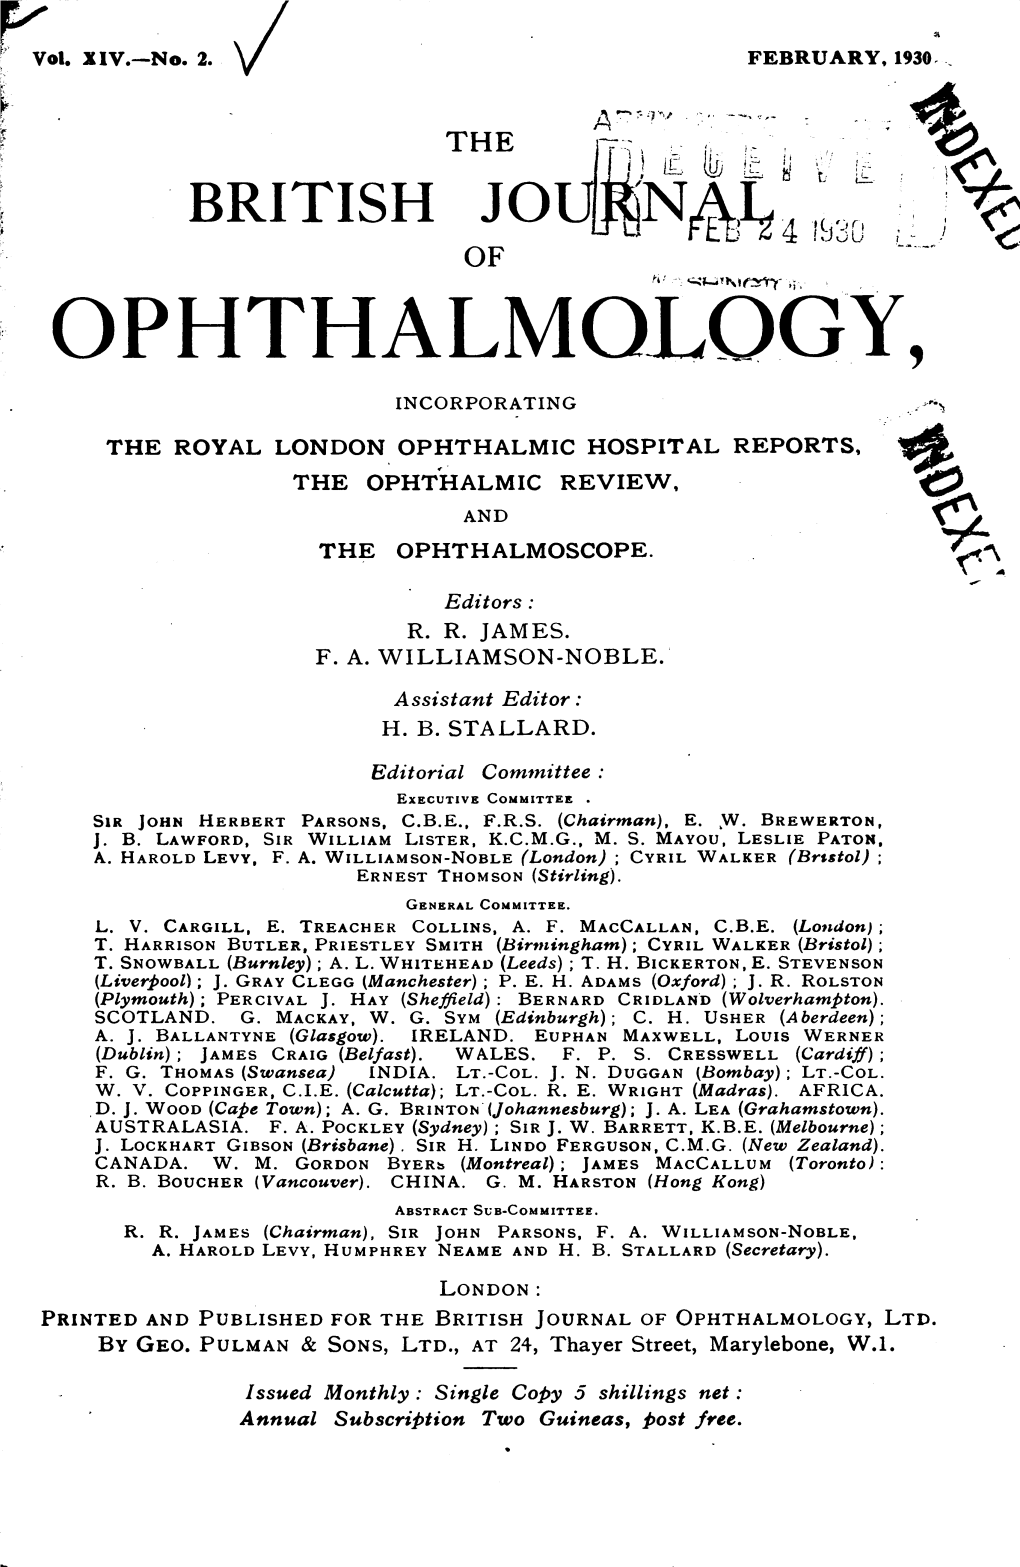 Ophthalmology, Incorporating the Royal London Ophthalmic Hospital Reports, the Ophthalmic Review, and the Ophthalmoscope